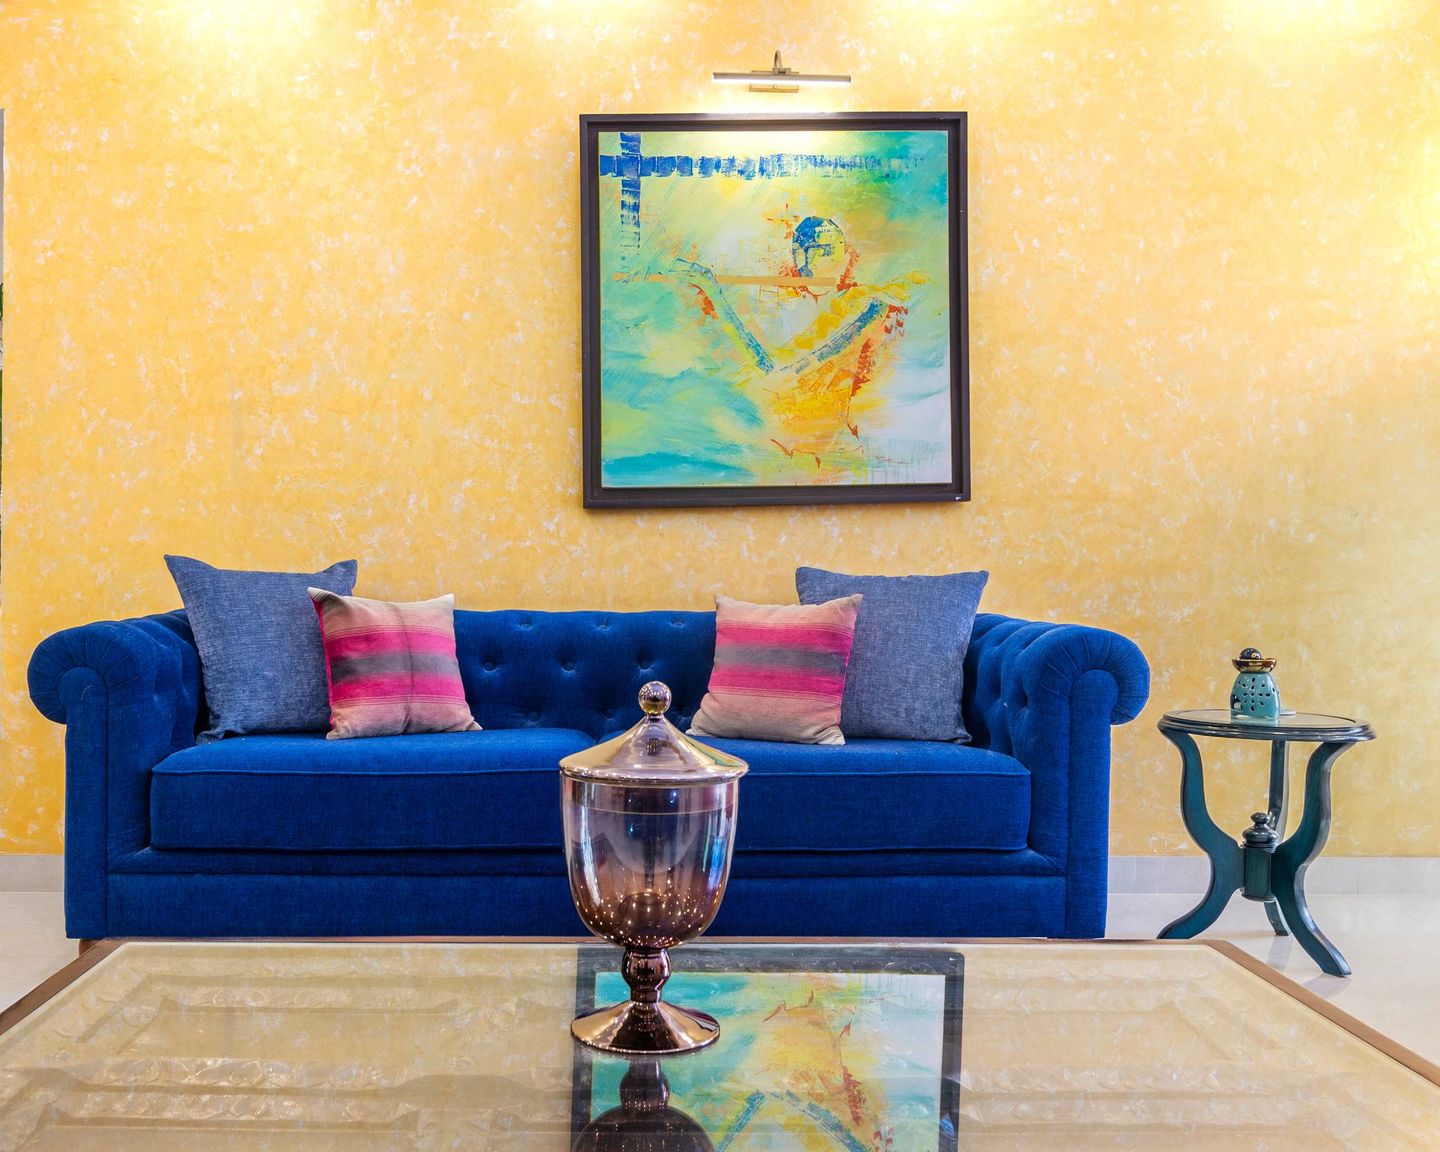 Textured Yellow Wallpaper Design With A Large Framed Painting - Livspace